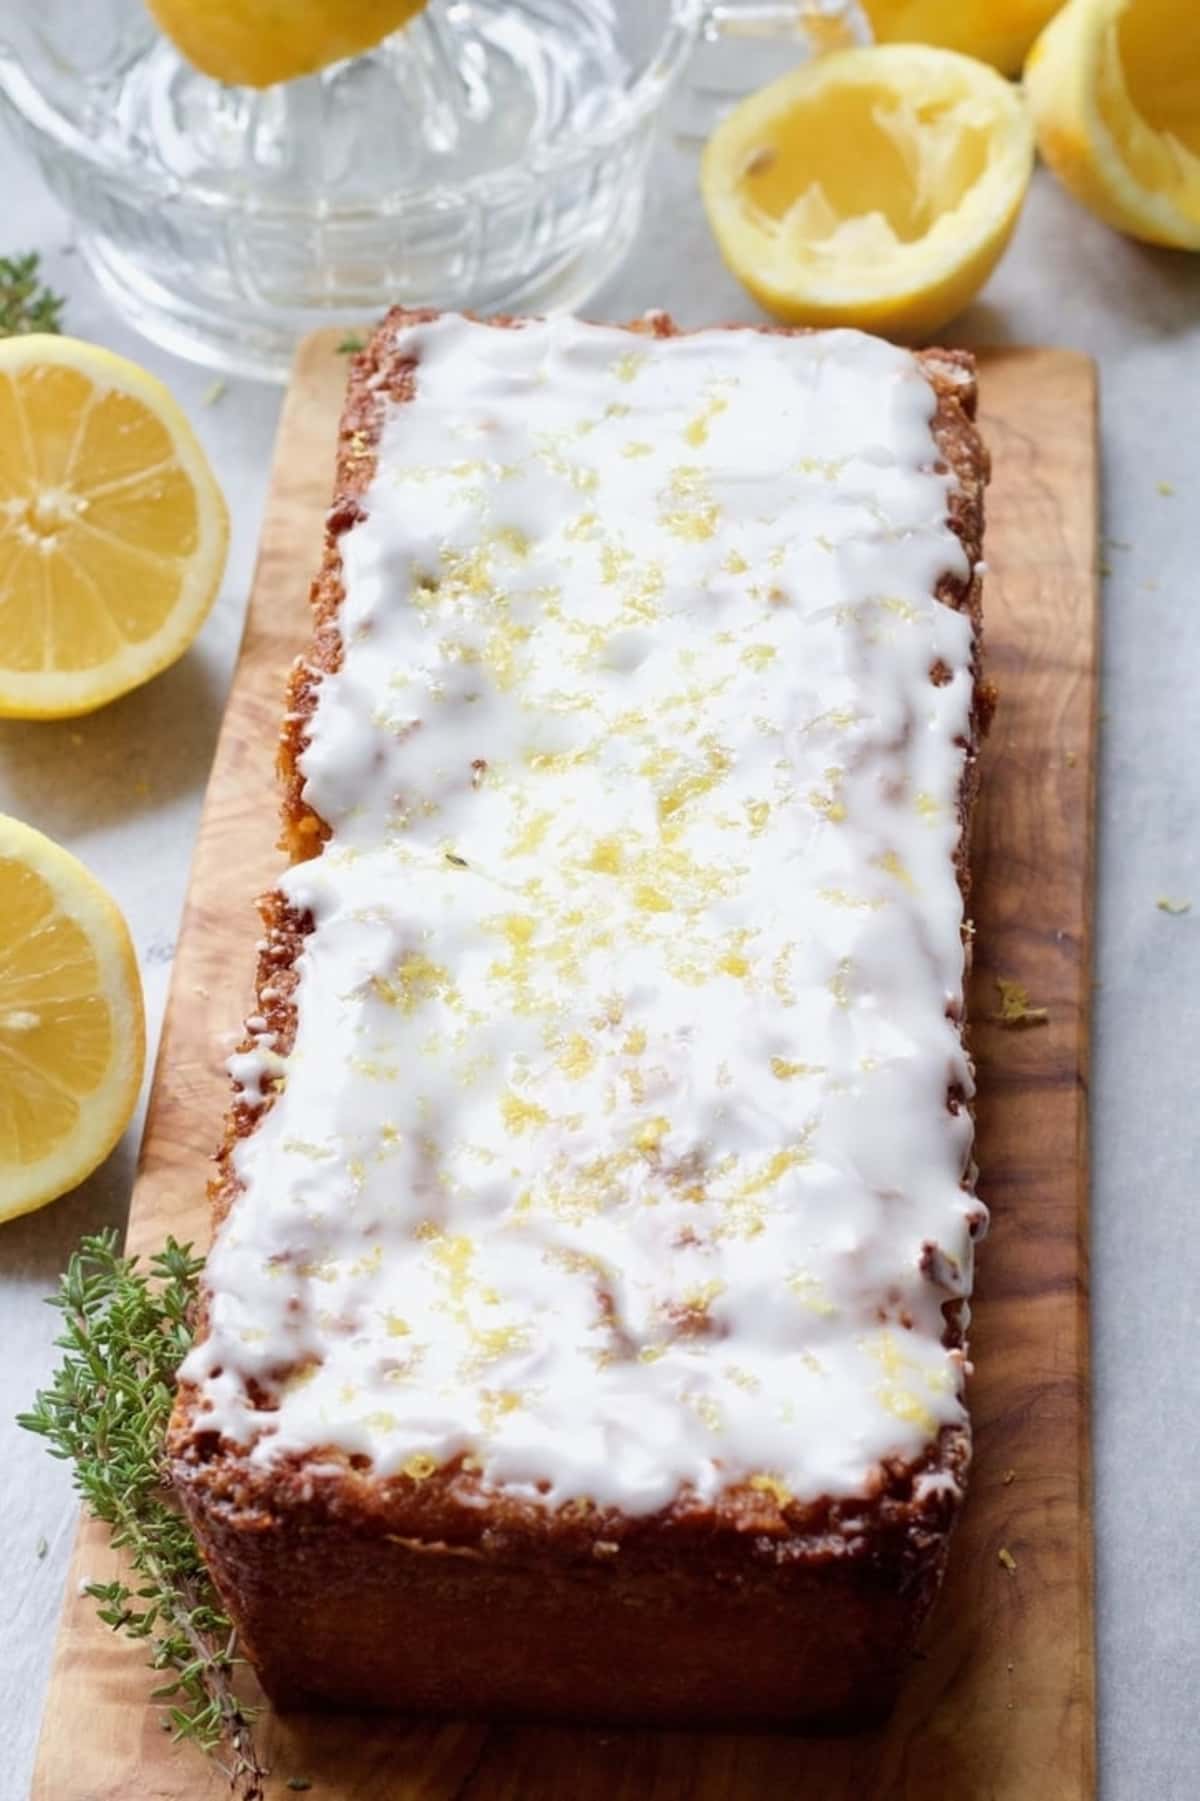 Iced vegan lemon drizzle cake on a wooden board.